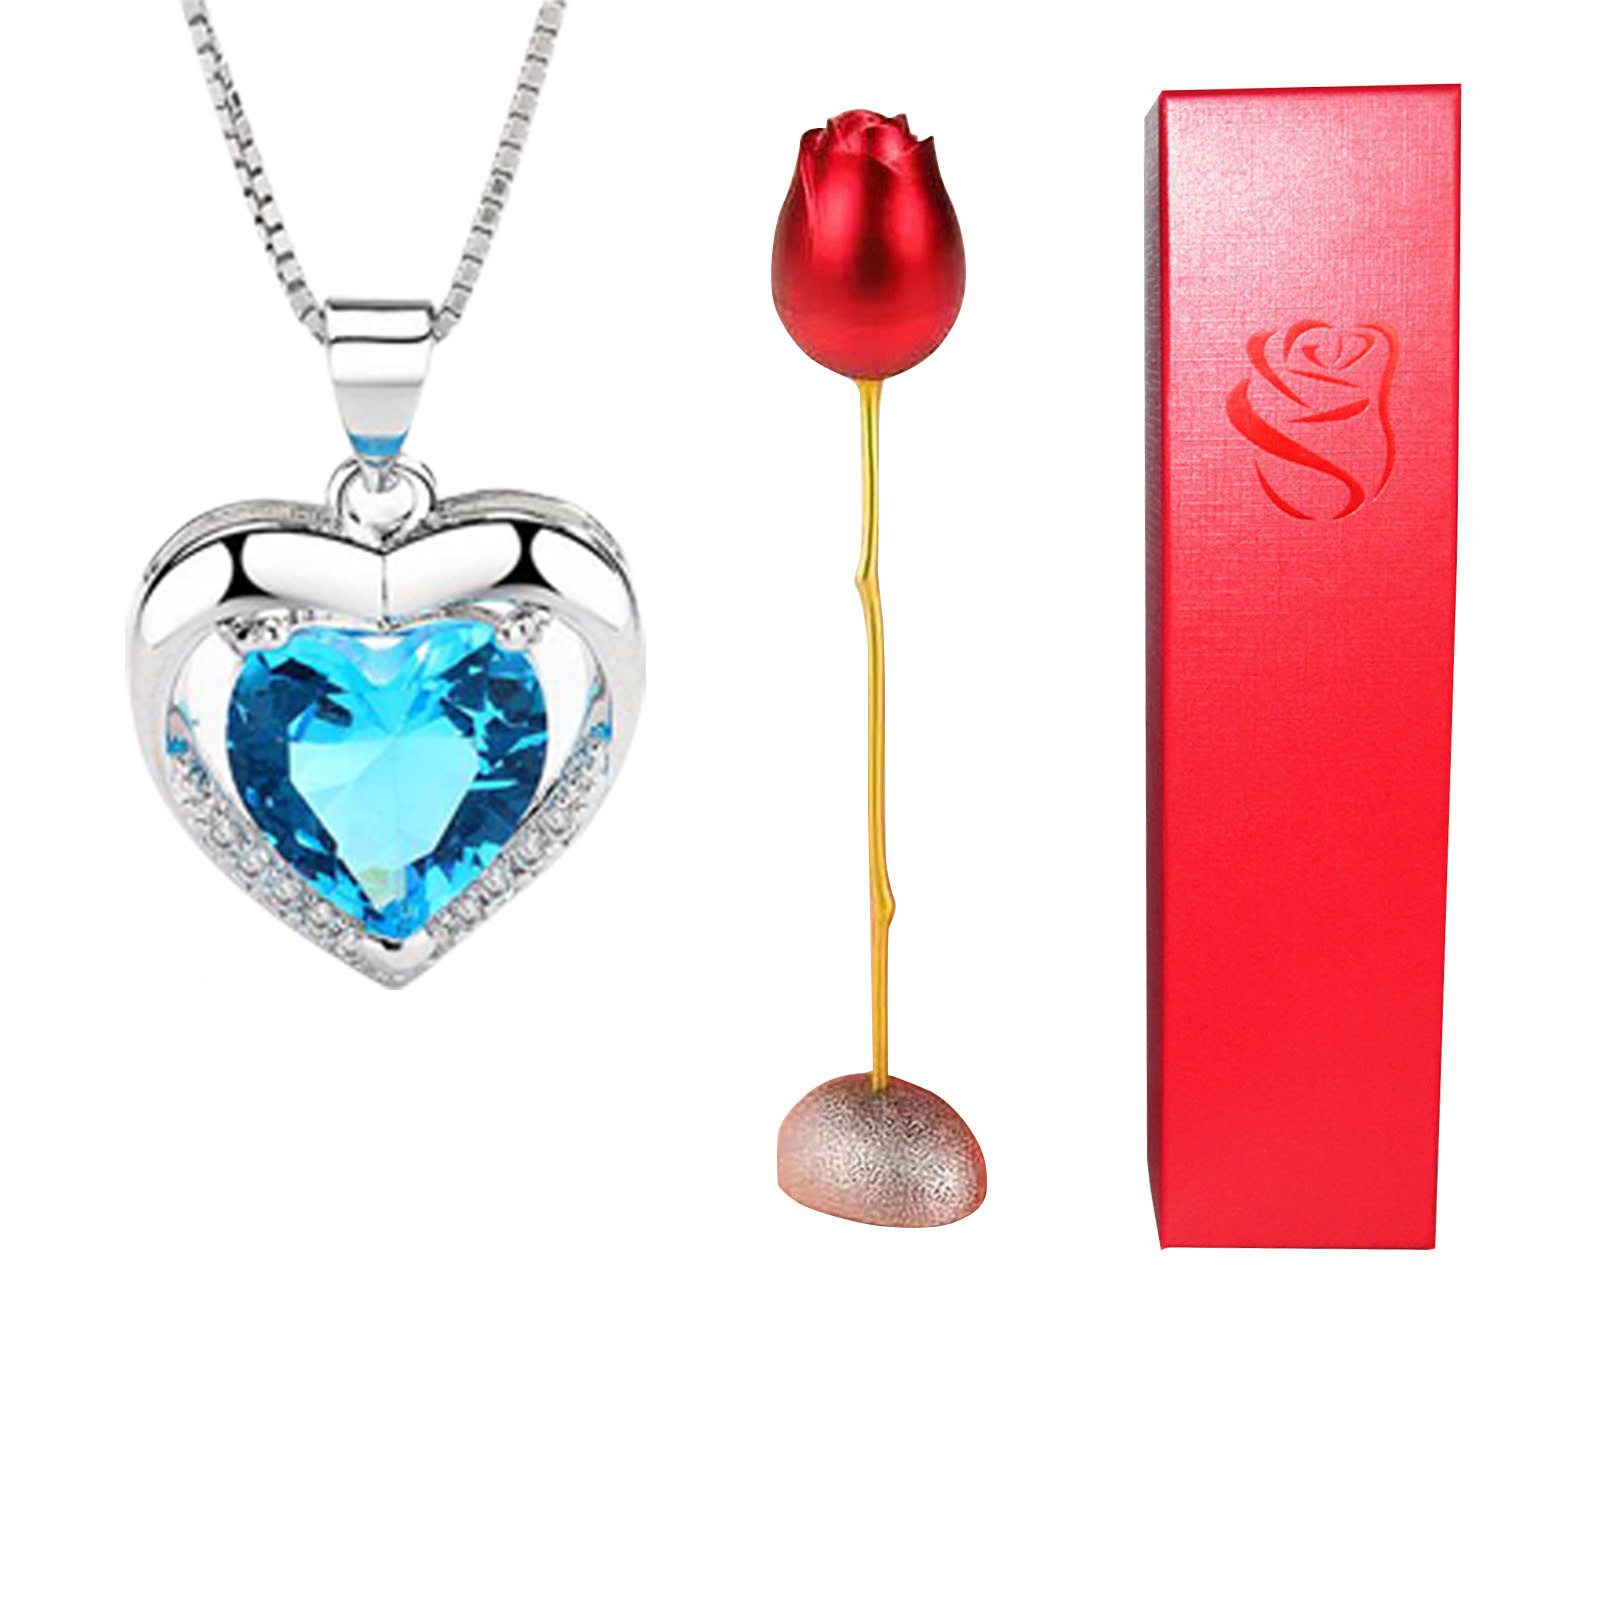 Rose and Pendant Gift Pack 10